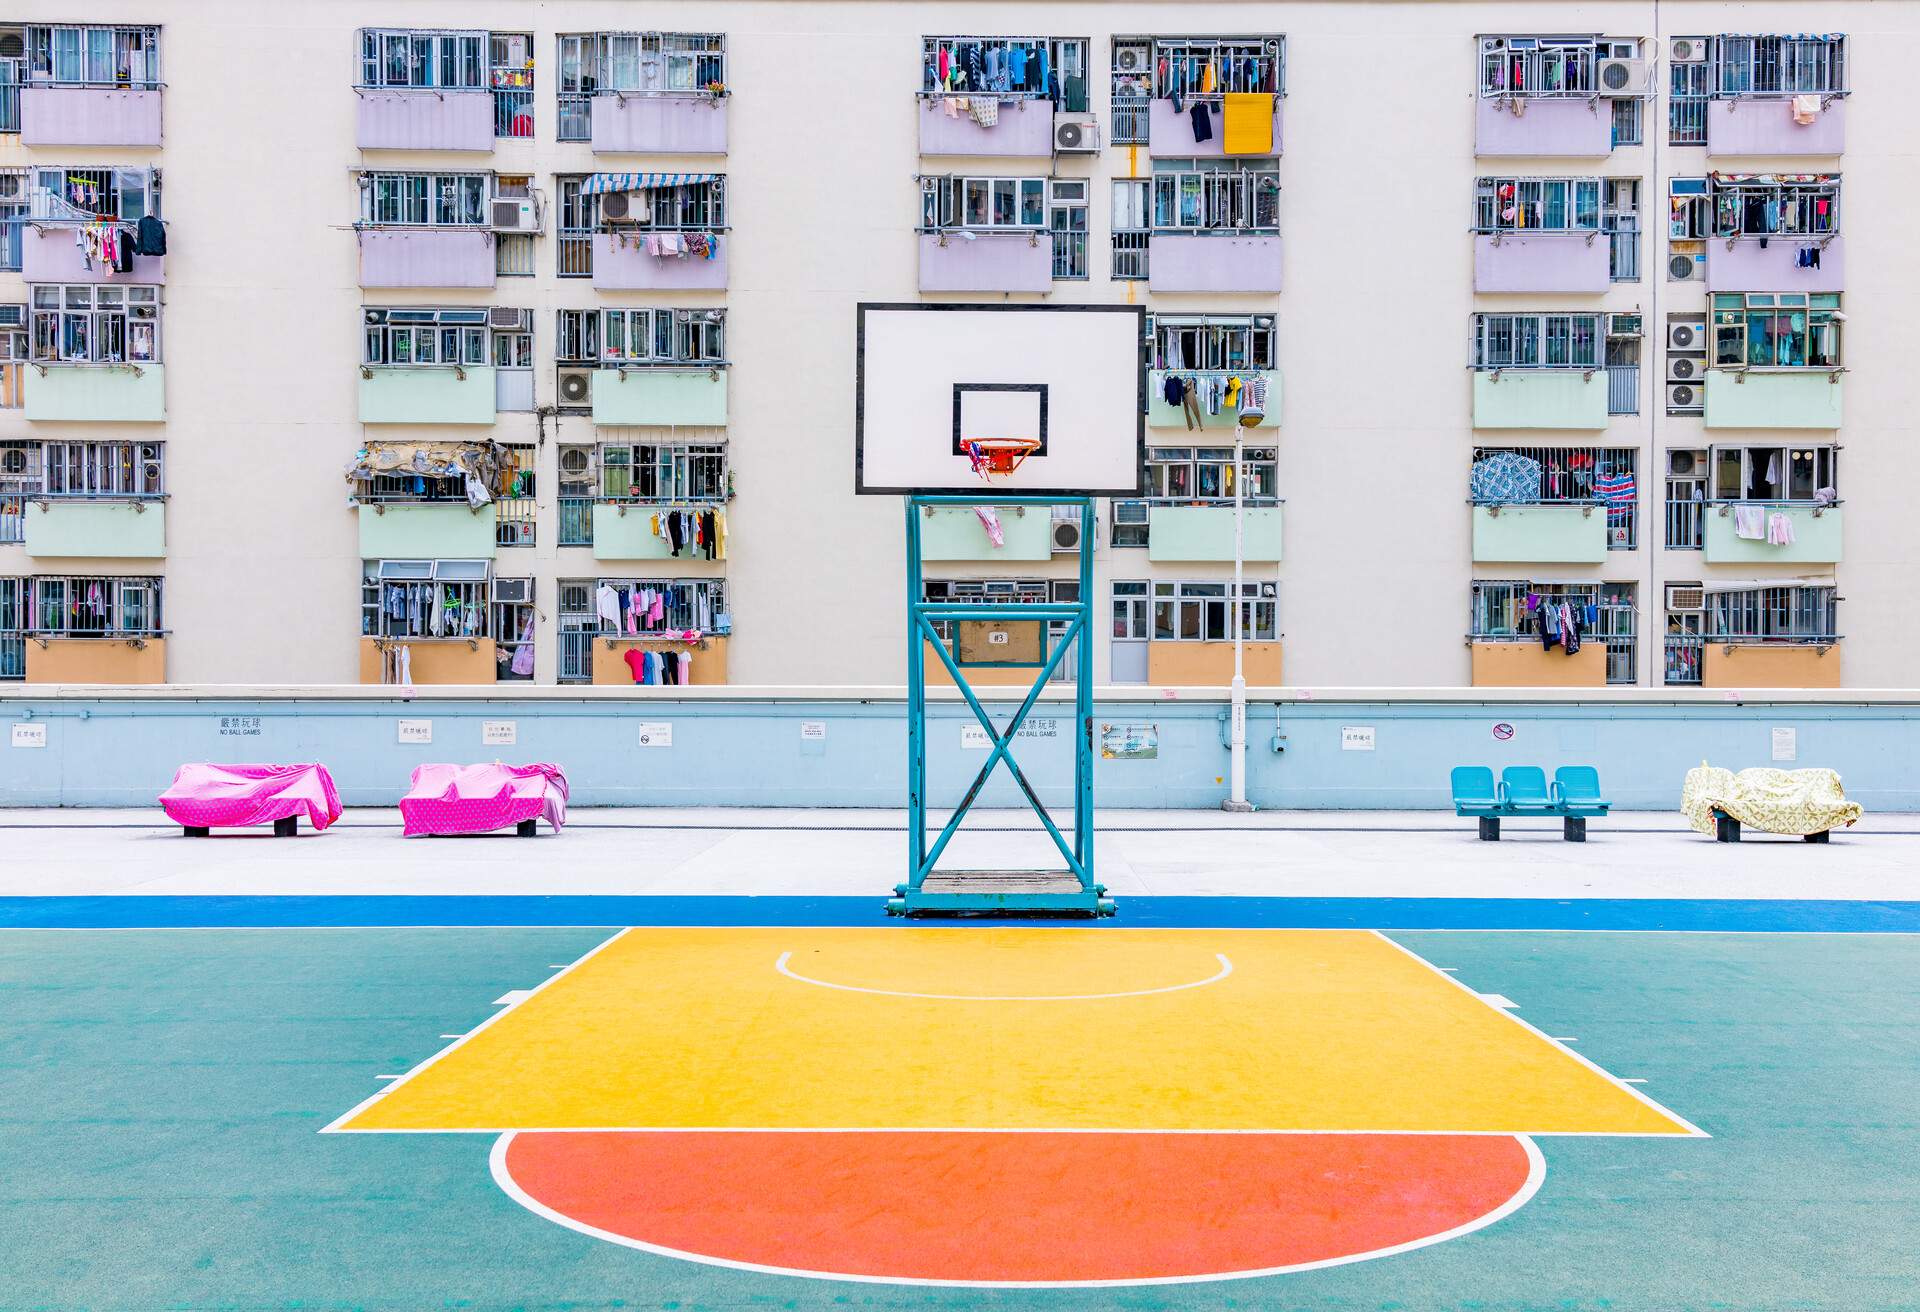 View of basketball court in Hong Kong's Choi Hung estate